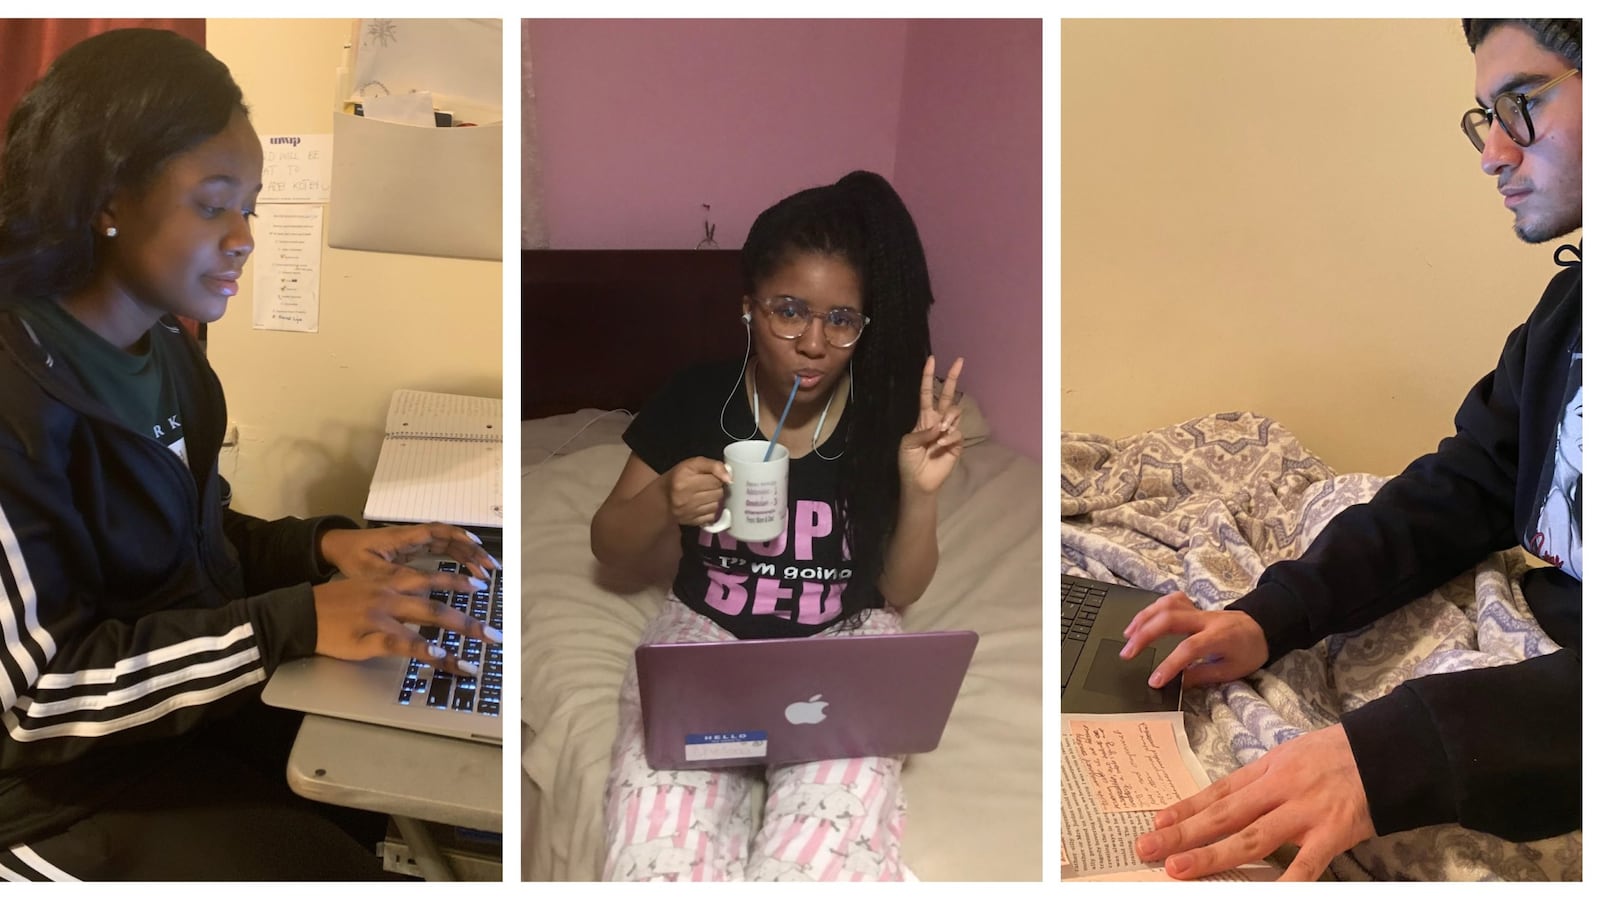 Newark's high school seniors are trying to keep up with course work at home while worrying about prom and graduation. From left: Kutorkor Kotey, Chelsea Ebinum, and Manuel Sosa-Garcia.